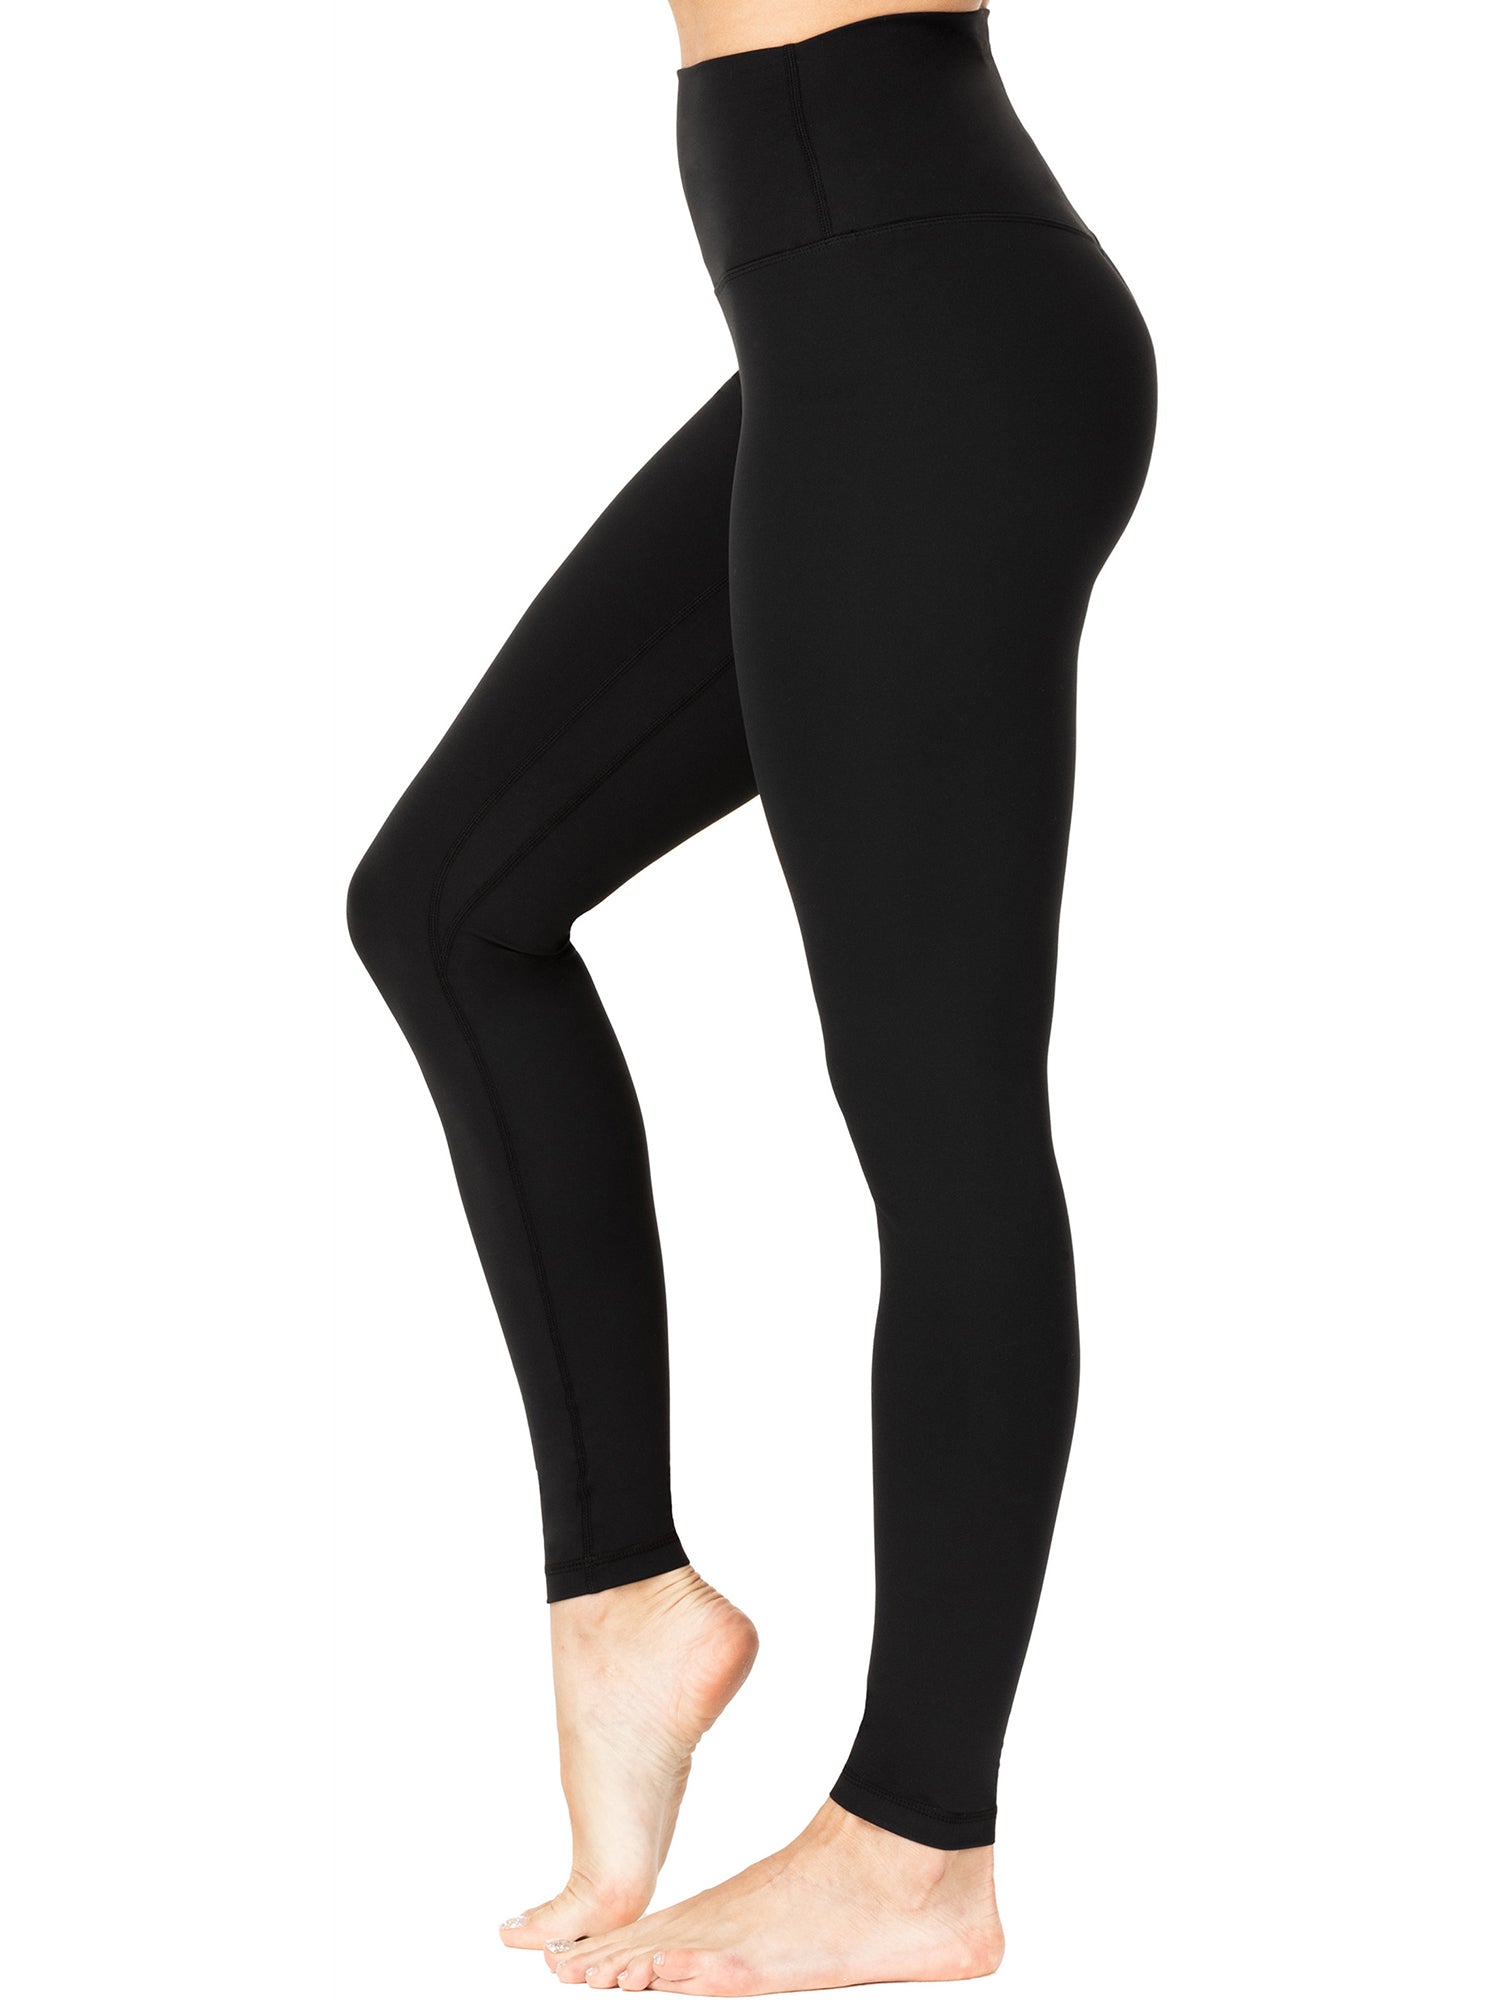 Butterfly Yoga Pants for Women Soft High Waisted Sports Workout